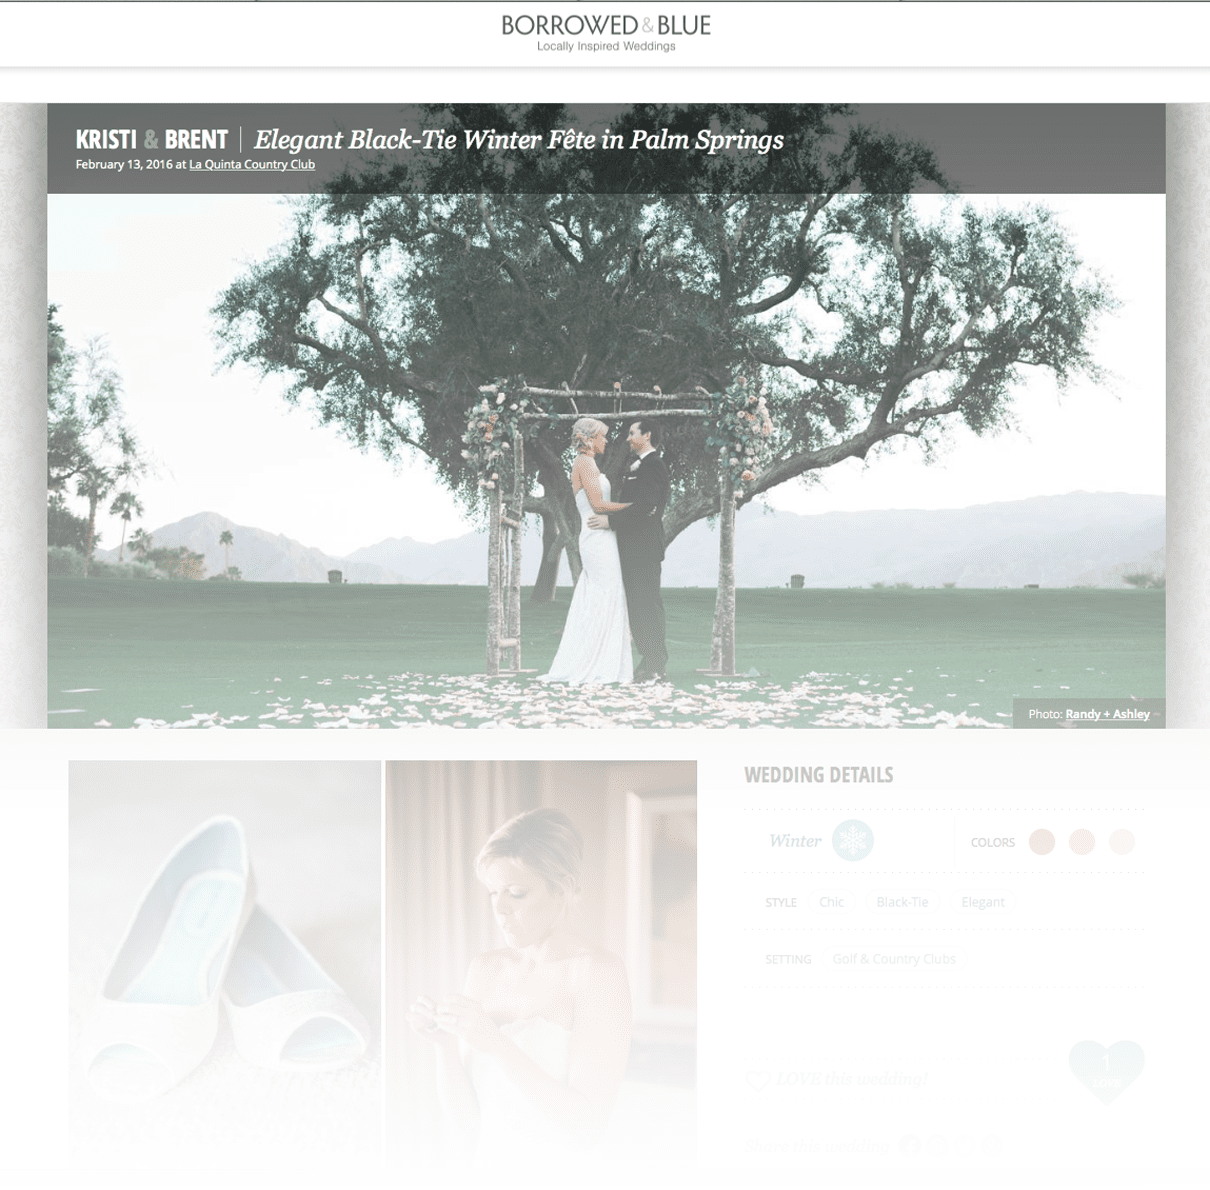 featured on borrowed and blue, la quinta country club wedding